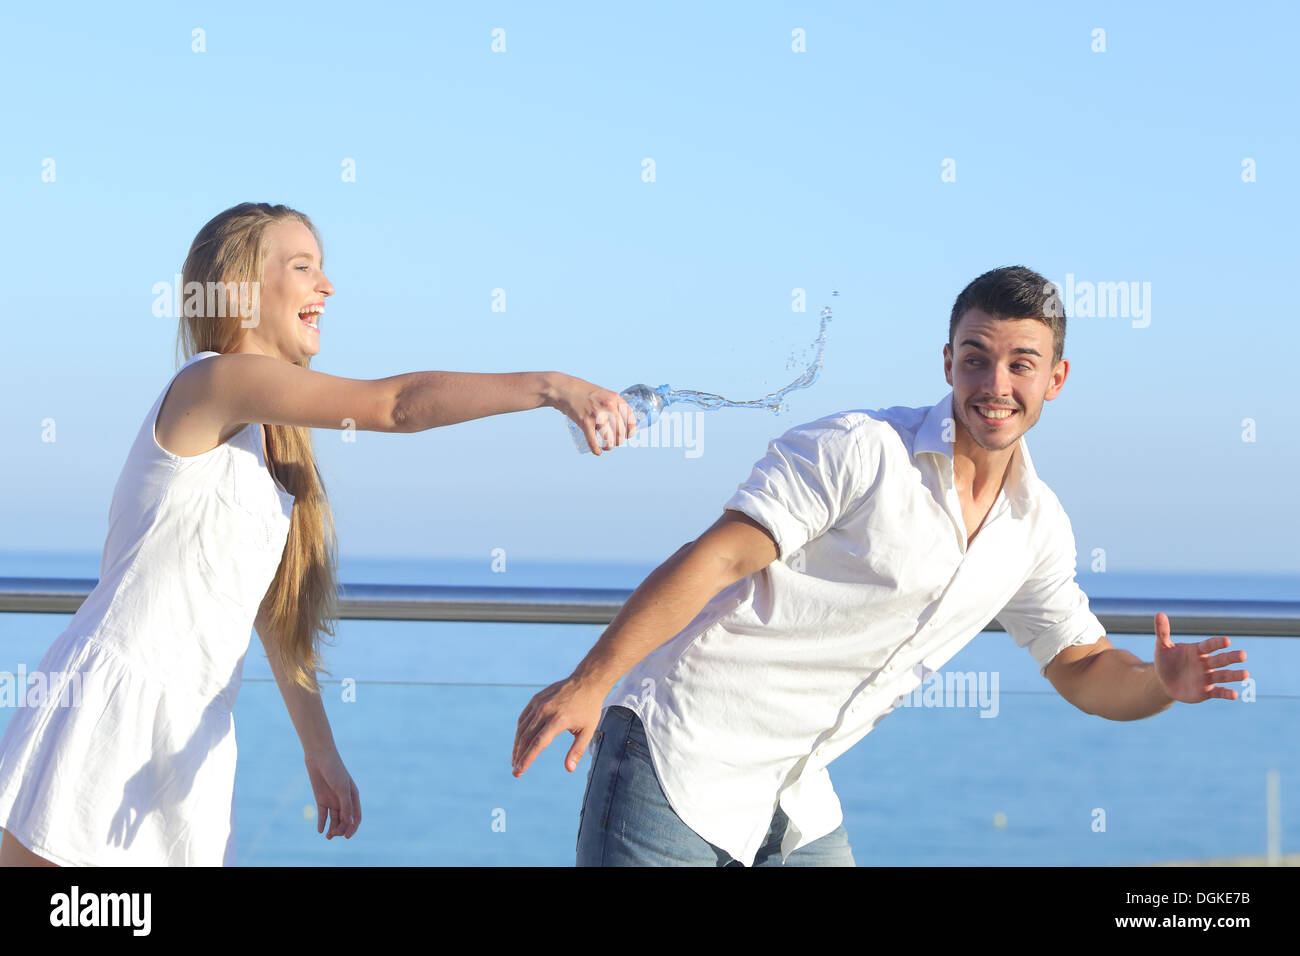 woman-throwing-water-to-her-boyfriend-with-the-sky-in-the-background-DGKE7B.jpg